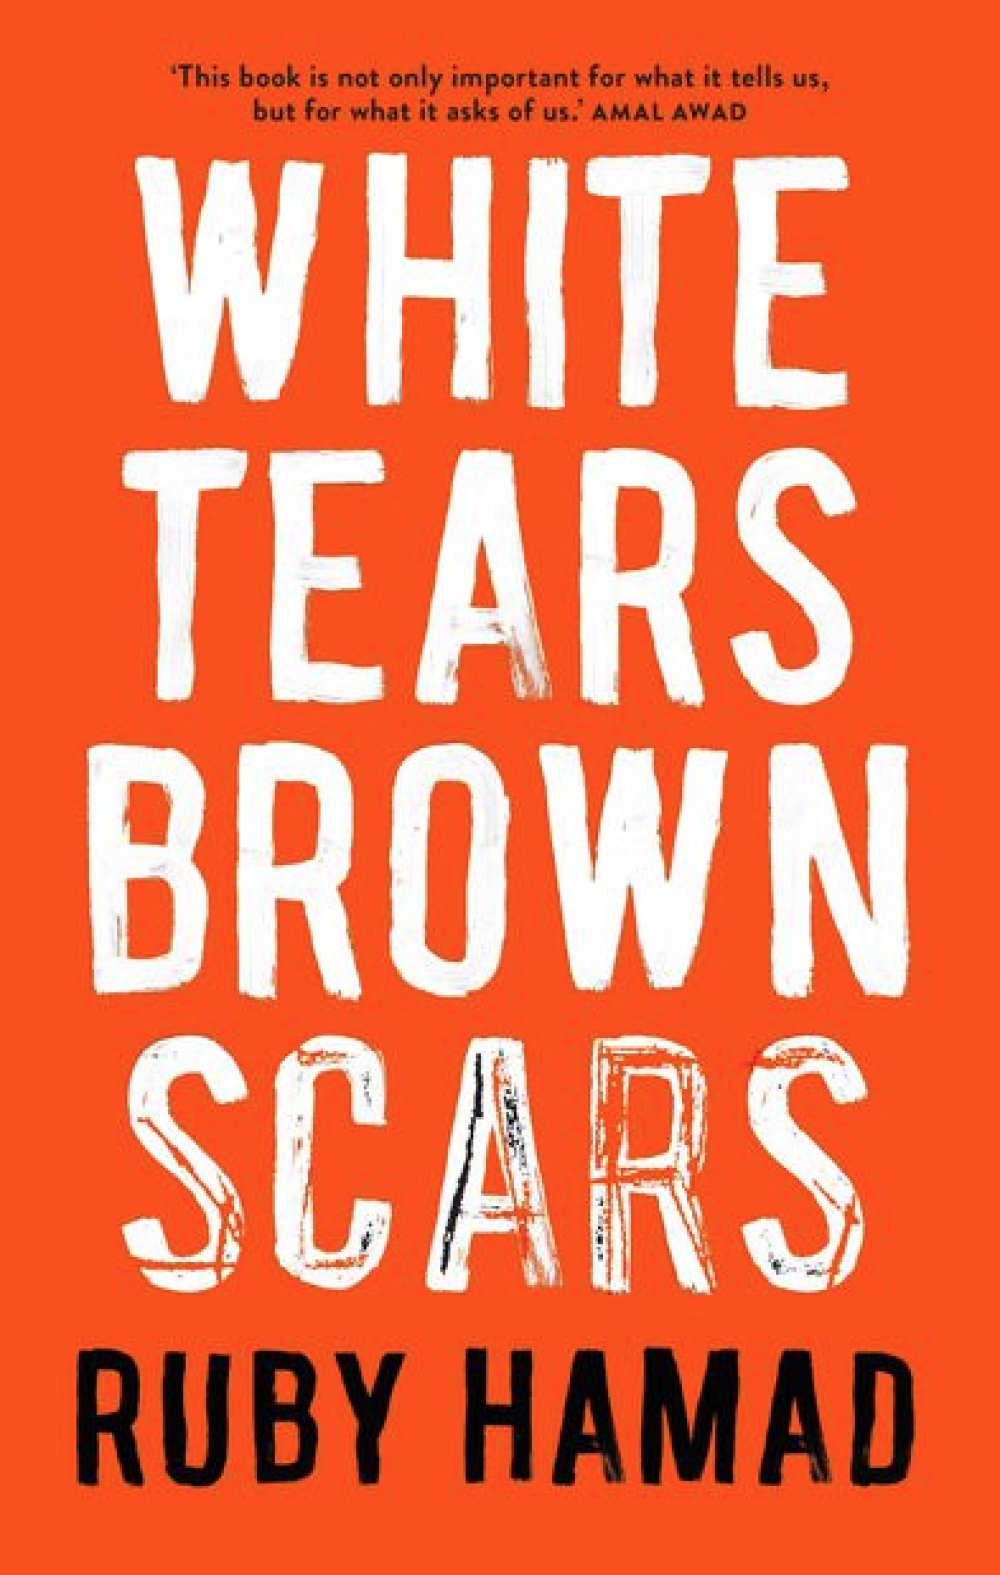 Strategic white tears: An interview with Ruby Hamad